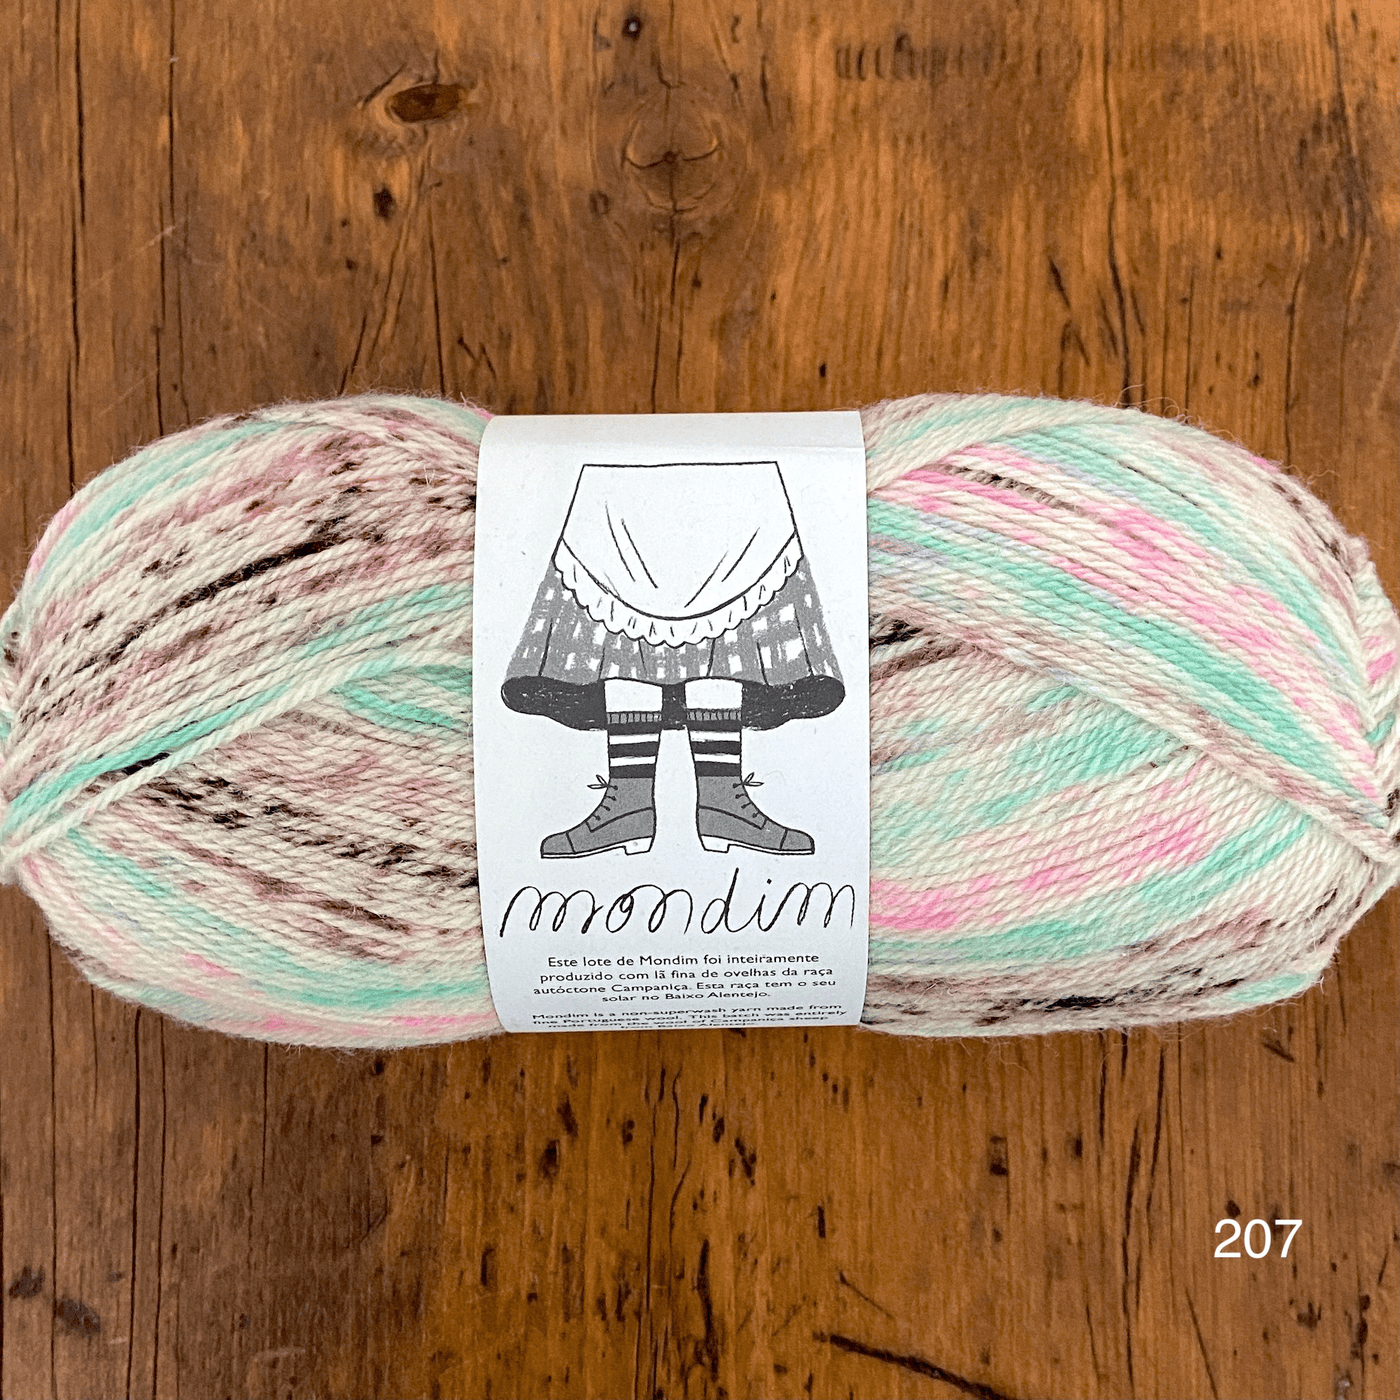 The Woolly Thistle Retrosaria Mondim Fingering Weight Yarn in 207 (mix of cream, pink, brown, and green)